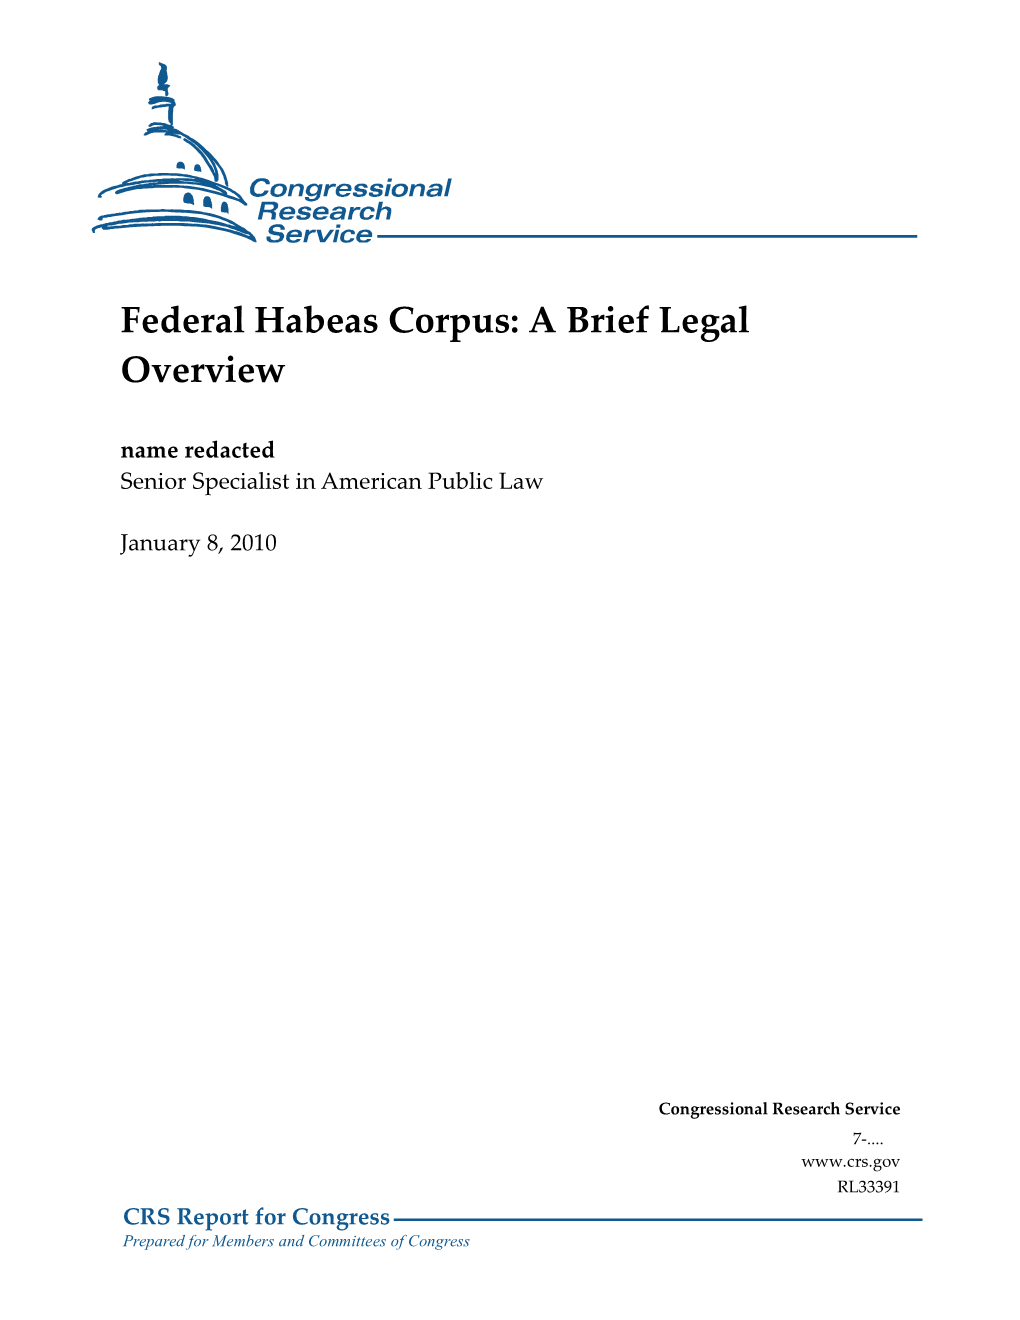 Federal Habeas Corpus: a Brief Legal Overview Name Redacted Senior Specialist in American Public Law